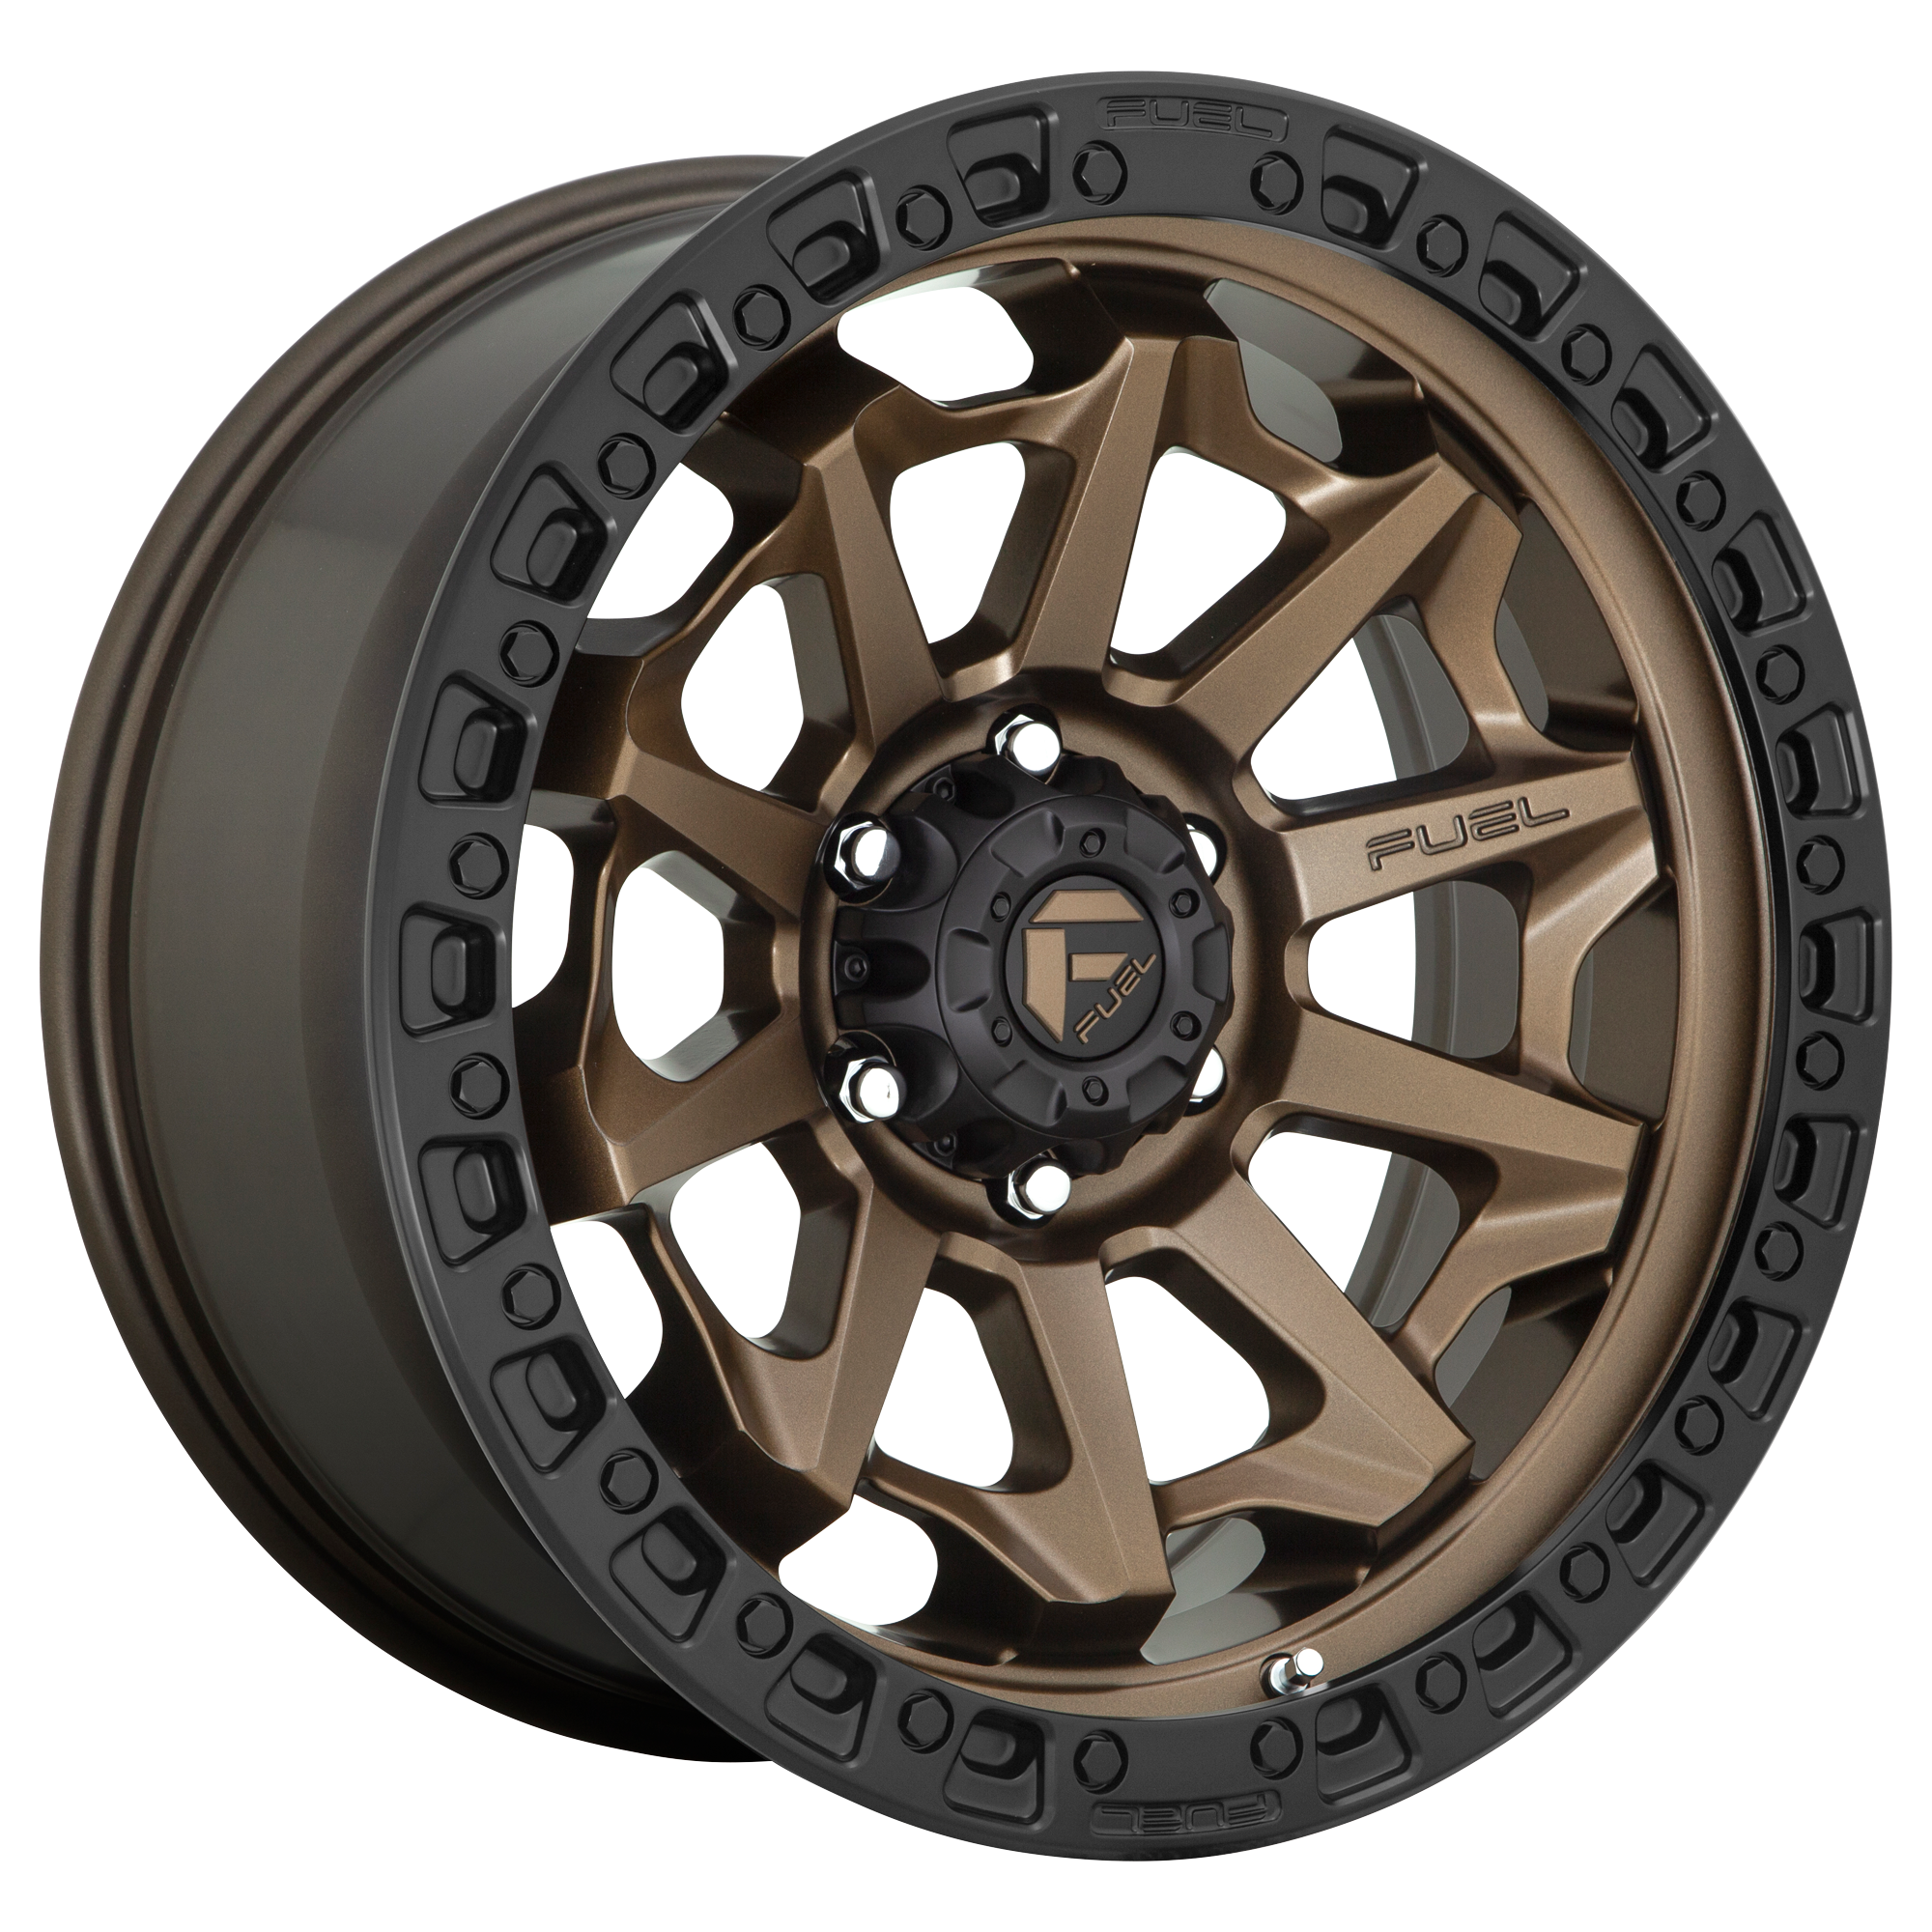 COVERT 20x9 8x180.00 MATTE BRONZE BLACK BEAD RING (20 mm) - Tires and Engine Performance